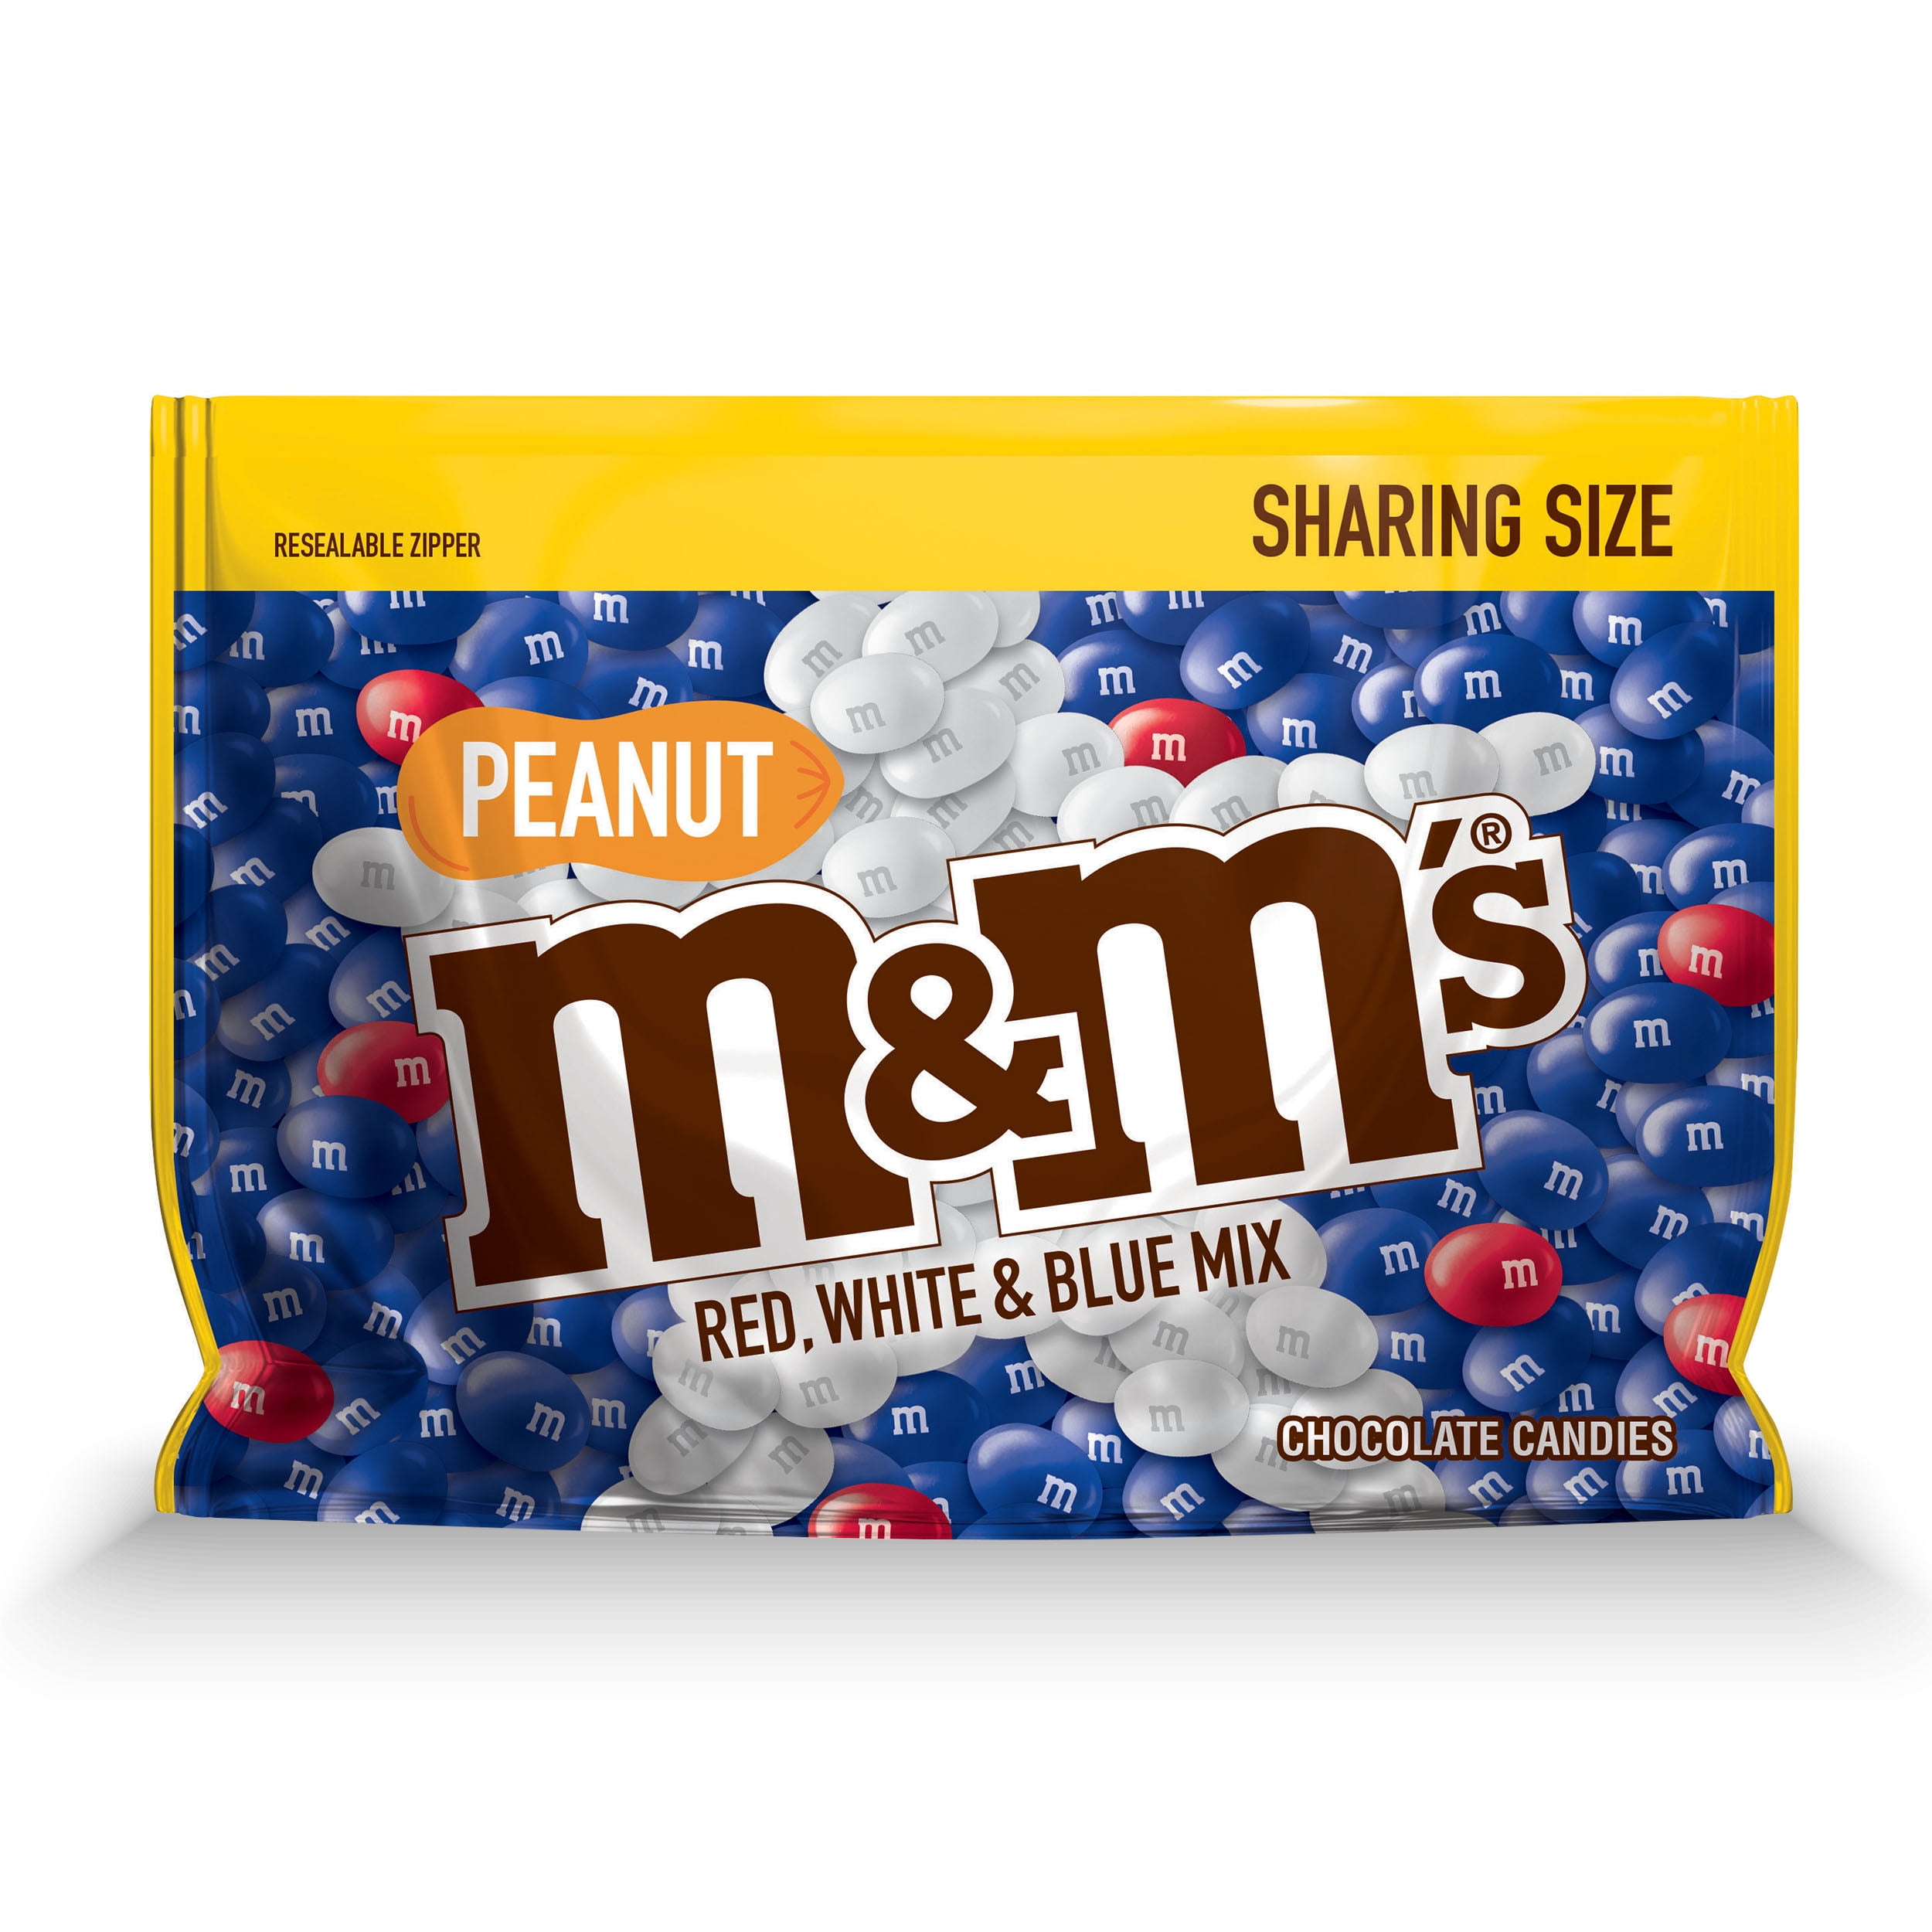 M&M's Red, White & Blue Patriotic Milk Chocolate Candy, 38 Ounce